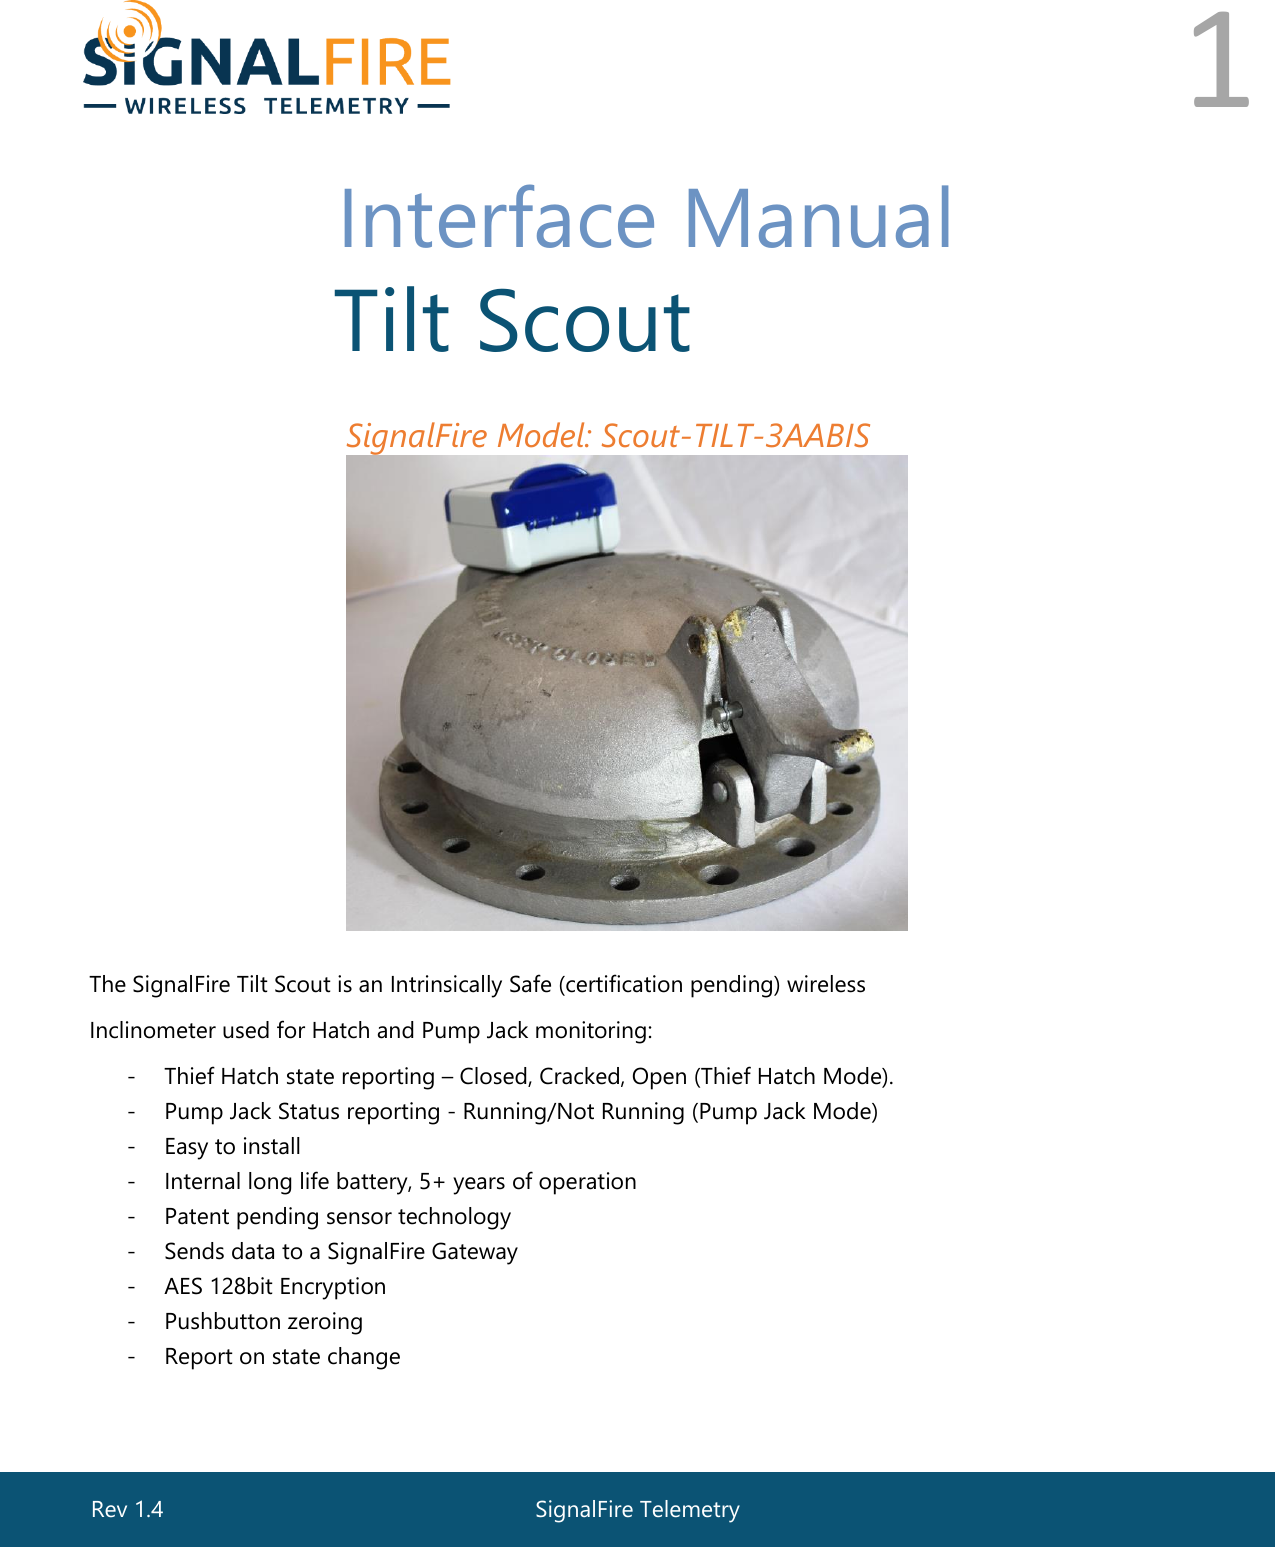  1       Interface Manual  Tilt Scout SignalFire Model: Scout-TILT-3AABIS  The SignalFire Tilt Scout is an Intrinsically Safe (certification pending) wireless Inclinometer used for Hatch and Pump Jack monitoring: - Thief Hatch state reporting – Closed, Cracked, Open (Thief Hatch Mode).  - Pump Jack Status reporting - Running/Not Running (Pump Jack Mode) - Easy to install - Internal long life battery, 5+ years of operation - Patent pending sensor technology  - Sends data to a SignalFire Gateway - AES 128bit Encryption - Pushbutton zeroing  - Report on state change SignalFire Telemetry Rev 1.4 